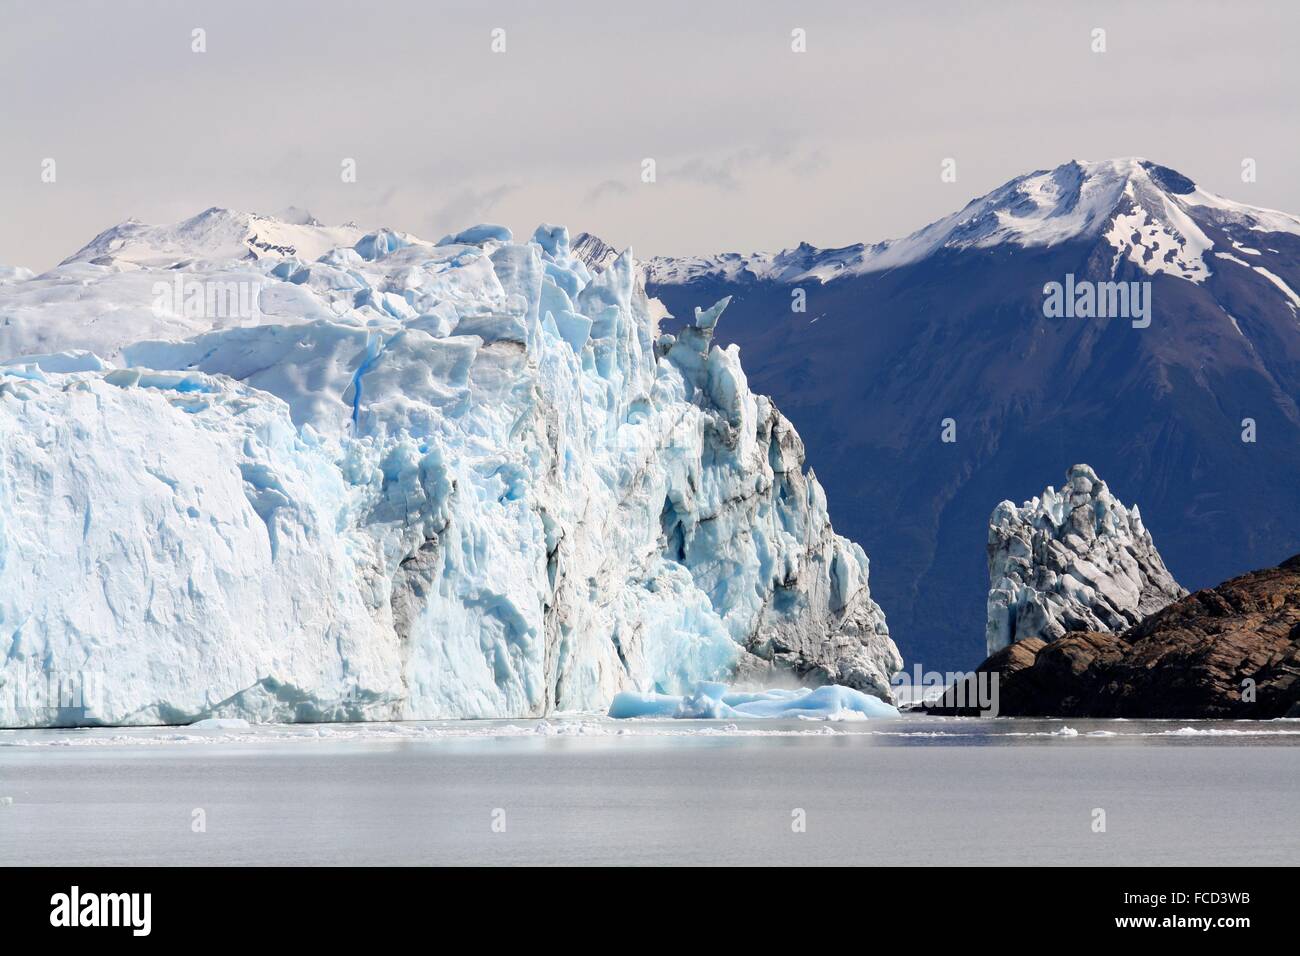 Spectacular Glacial Landscape With Glaciers, Geological Formations And High Mountain Stock Photo